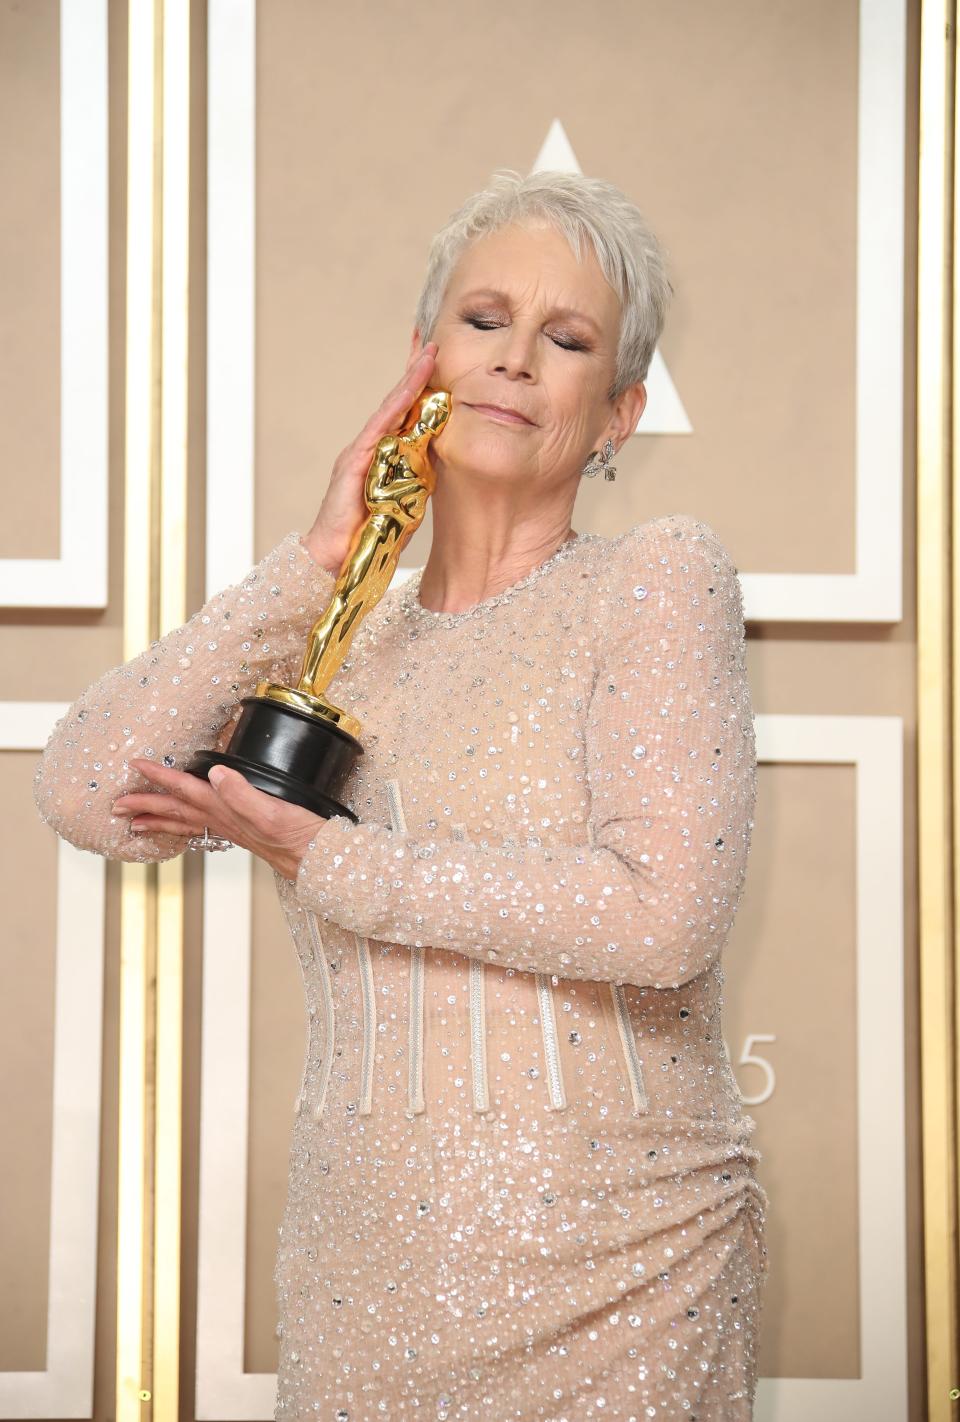 Jamie Lee Curtis begged not to be canceled on the same night as winning her first Oscar after she accidentally insulted a journalist from Hungary.